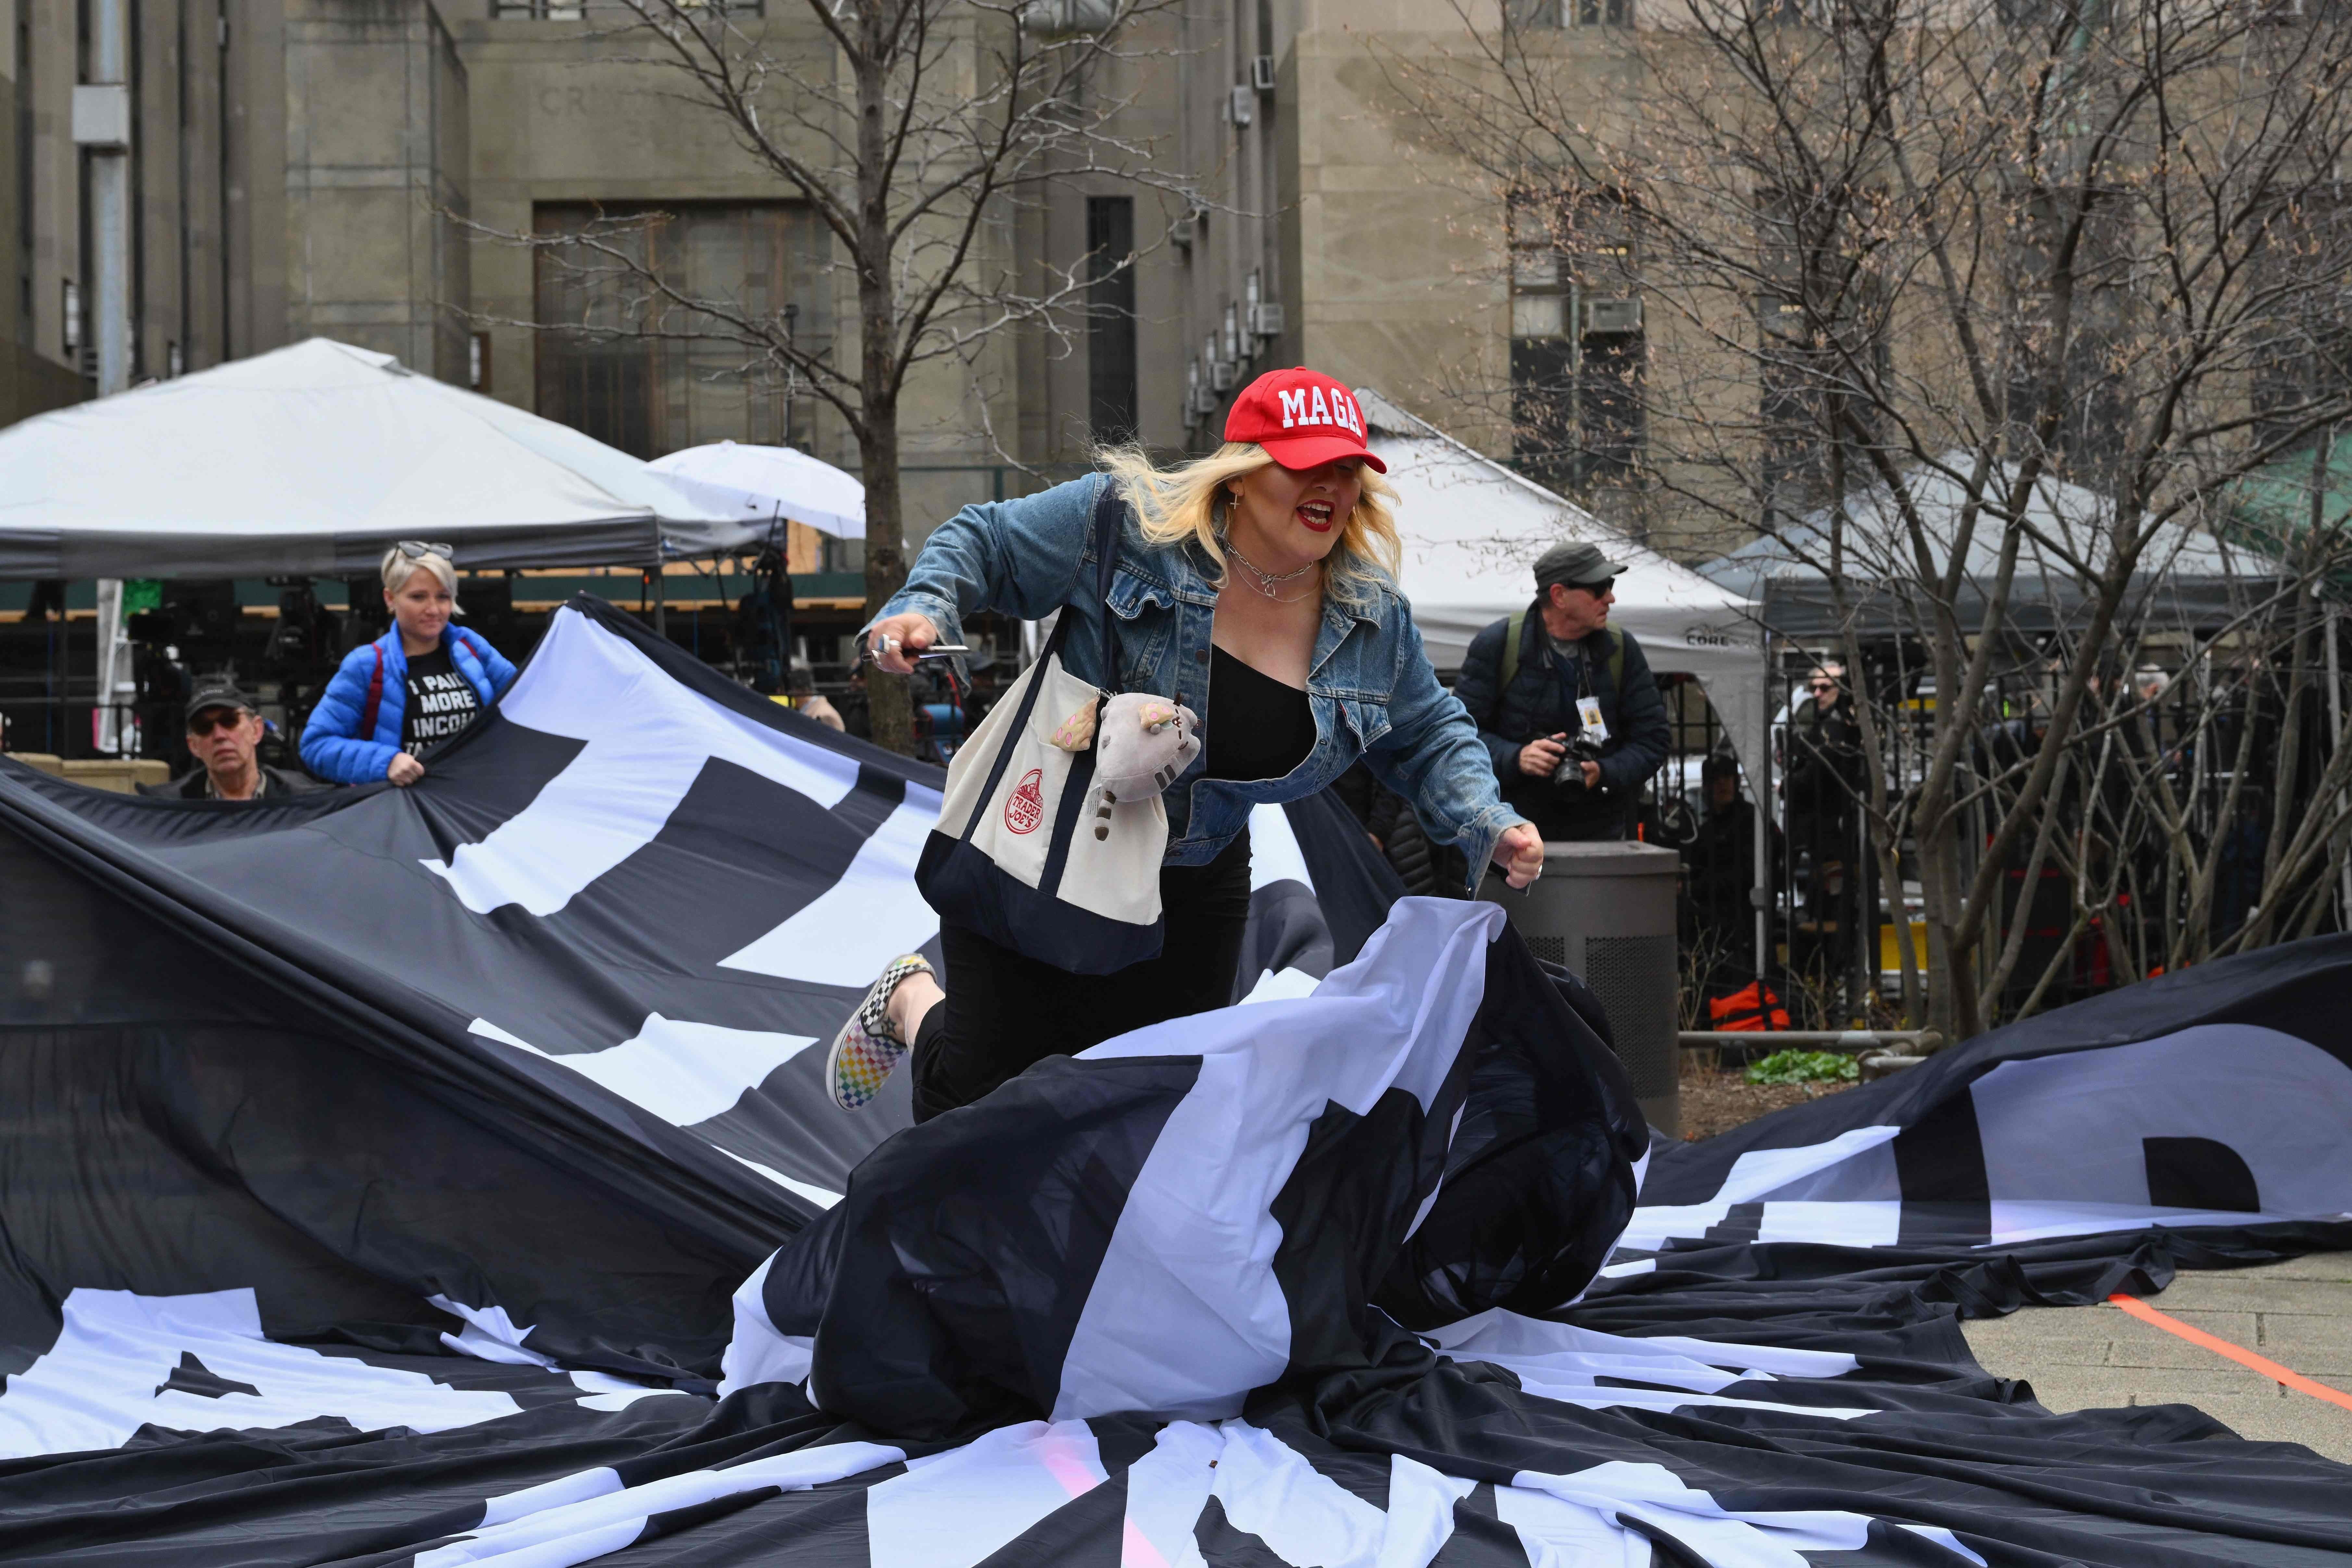 A supporter of former US president Donald Trump tears up an anti-Trump banner during a protest outside of Manhattan Criminal Court in New York City